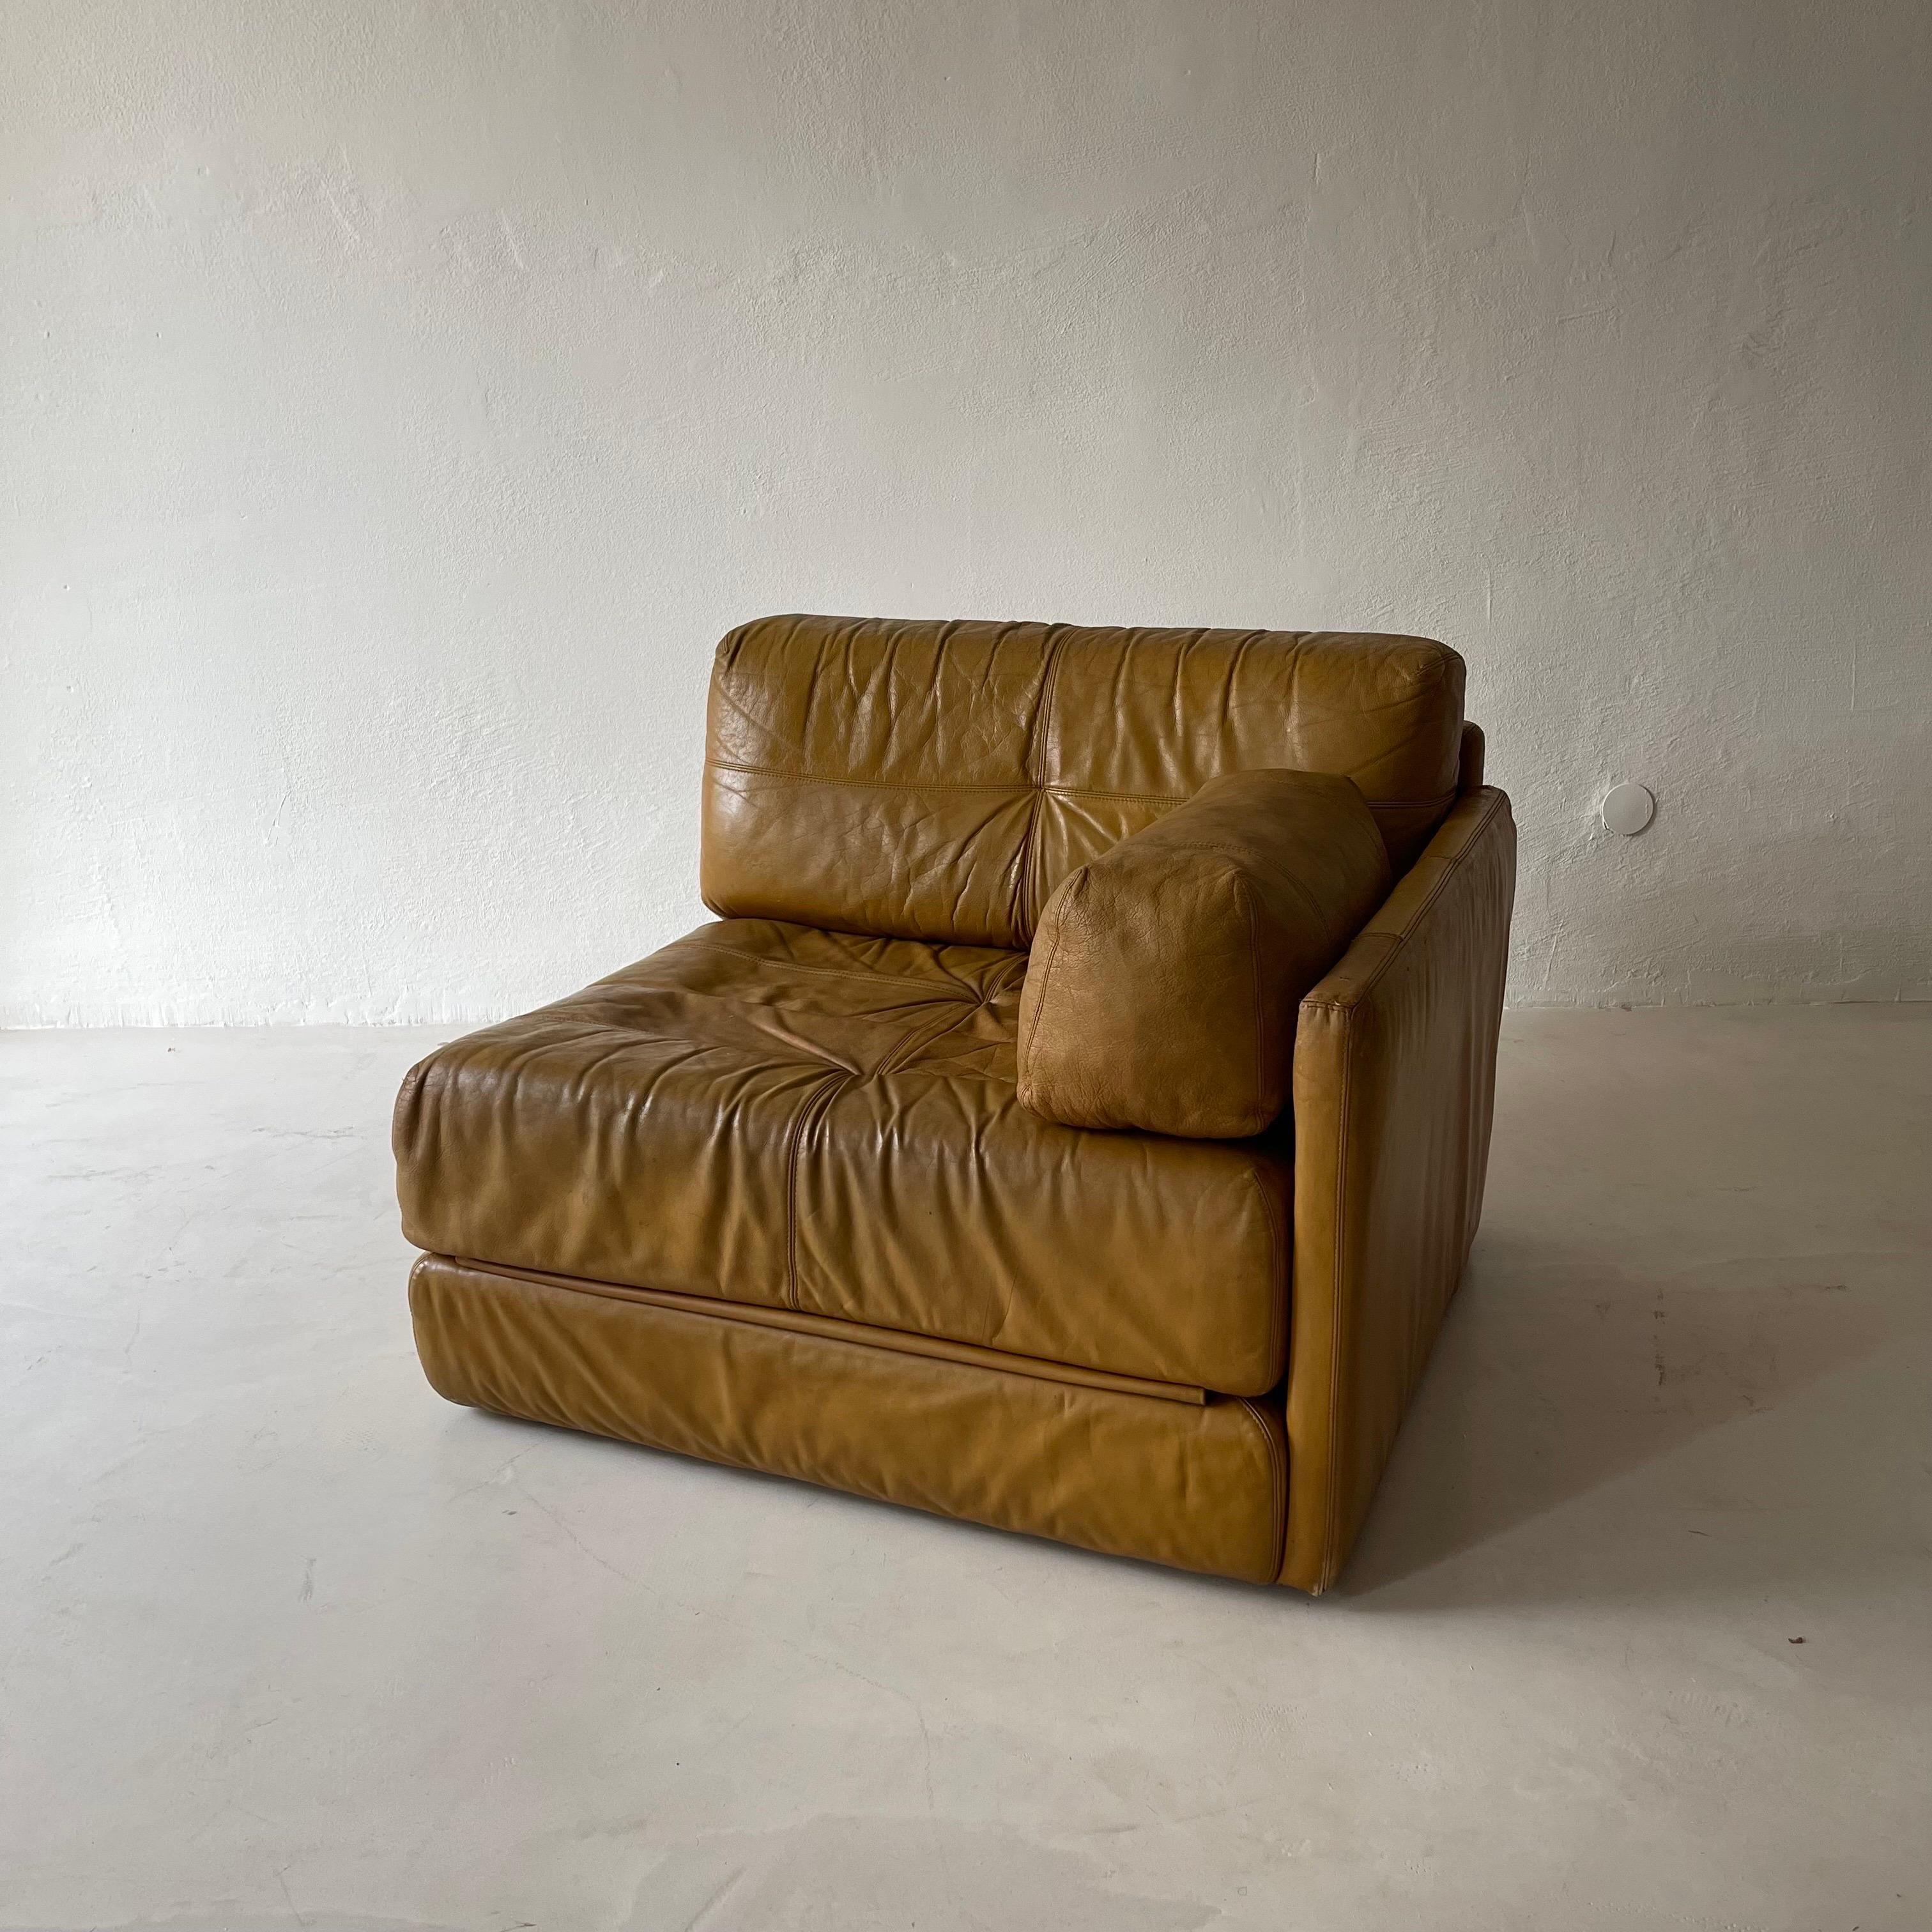 Wittmann Atrium Cognac Leather Pair Lounge Chairs, 1970s In Good Condition For Sale In Vienna, AT